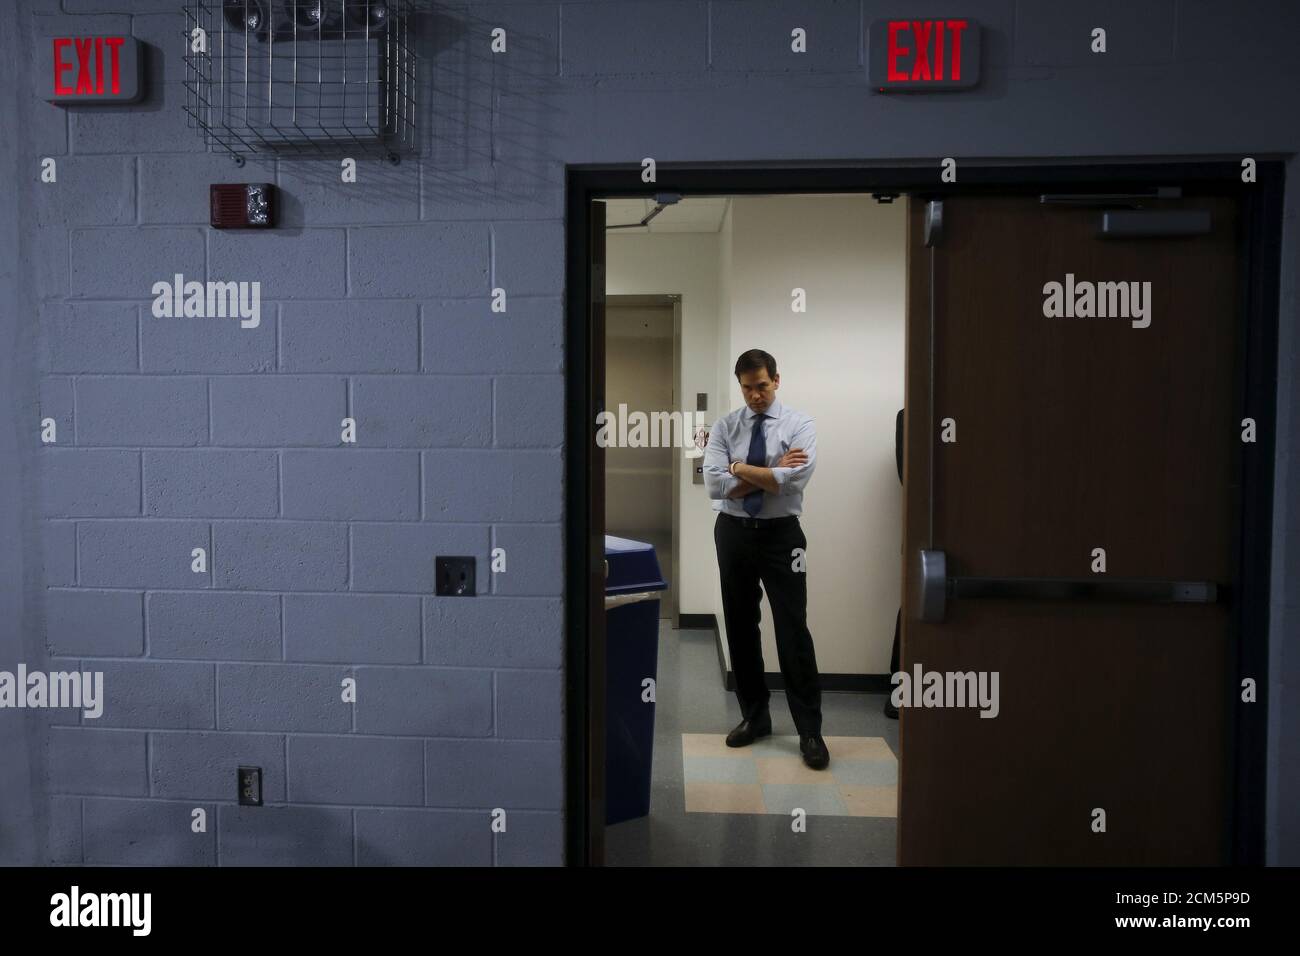 U.S. Senator and Republican presidential candidate Marco Rubio listens to the invocation from a backstage area before a campaign rally at Palm Beach Atlantic University in West Palm Beach, Florida, March 14, 2016.  REUTERS/Carlo Allegri      TPX IMAGES OF THE DAY Stock Photo